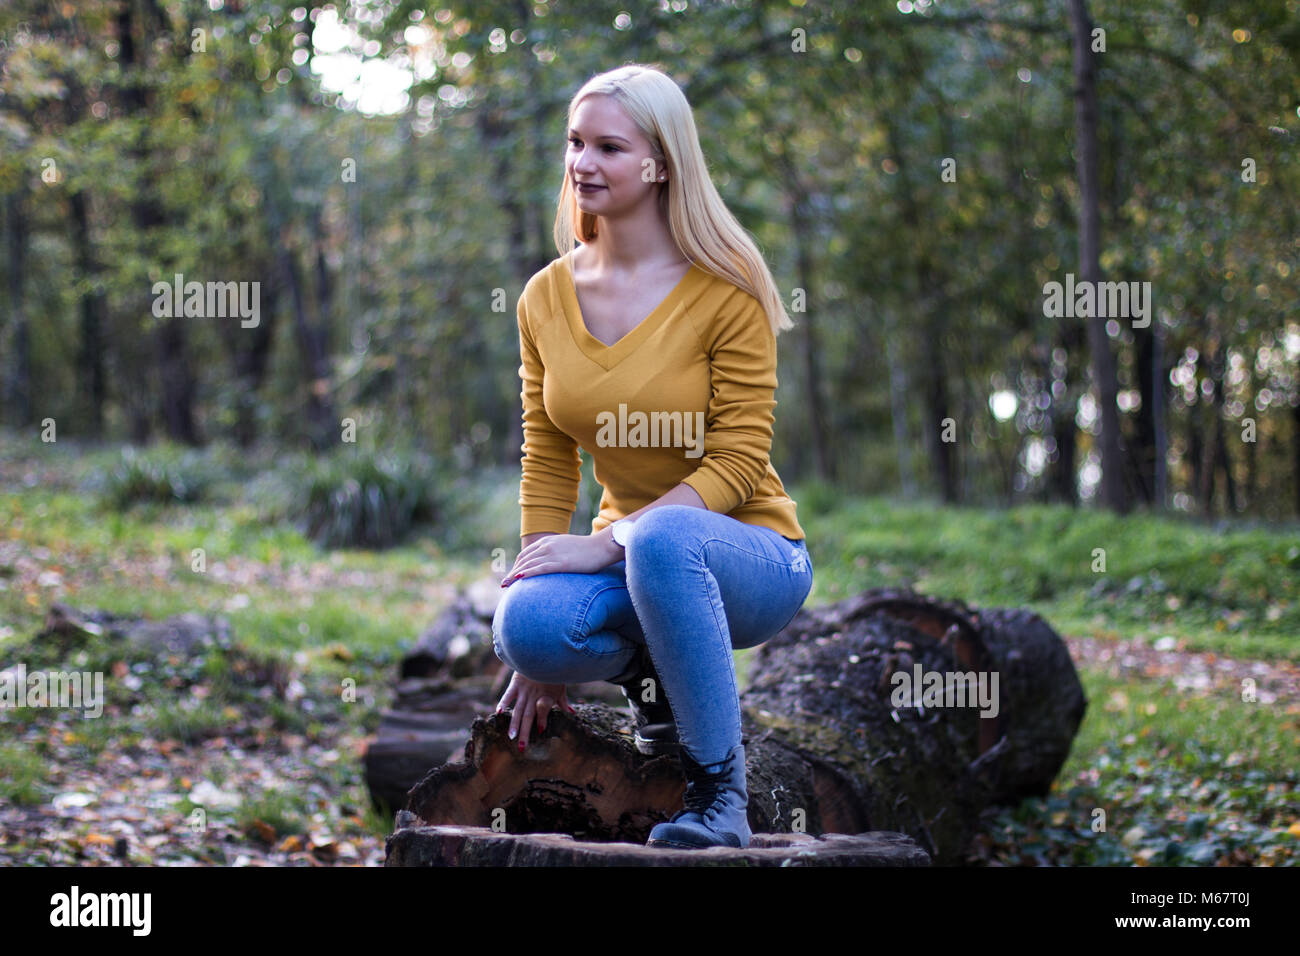 Young and beautiful blonde woman in the forest, enjoying nature. Stock Photo